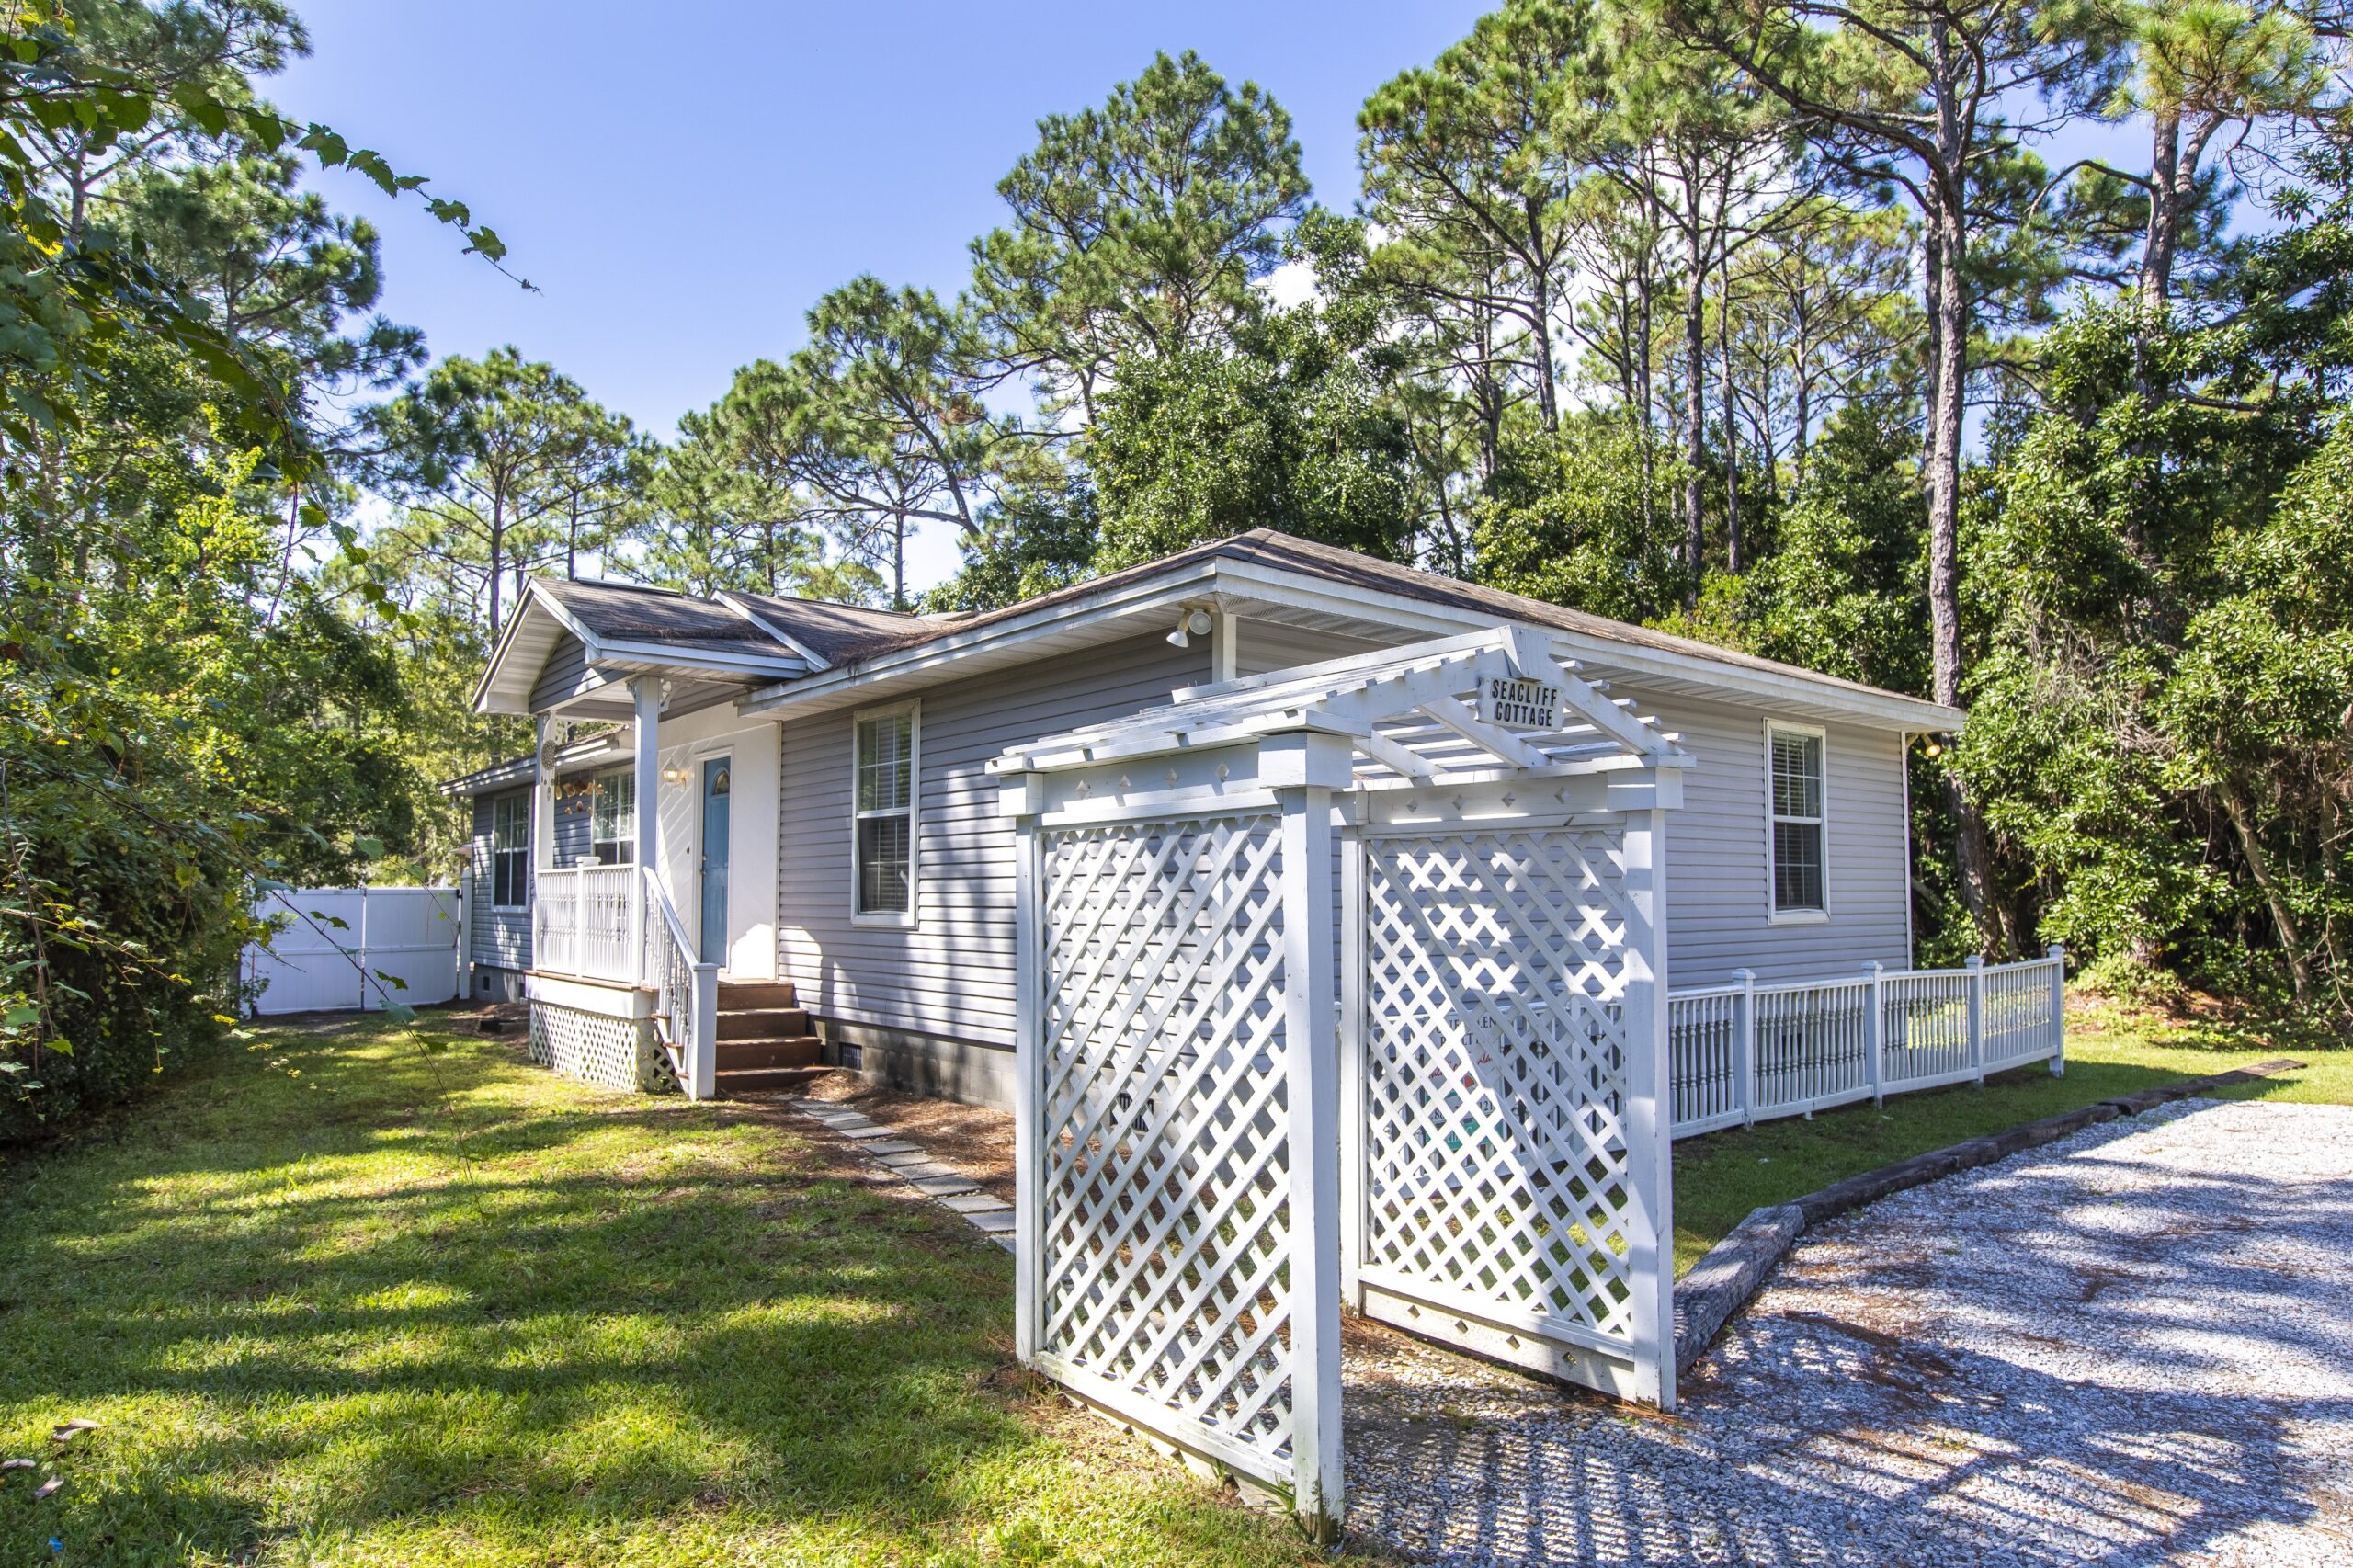 Photo of Seacliff Cottage, a rental House located in Seagrove Beach